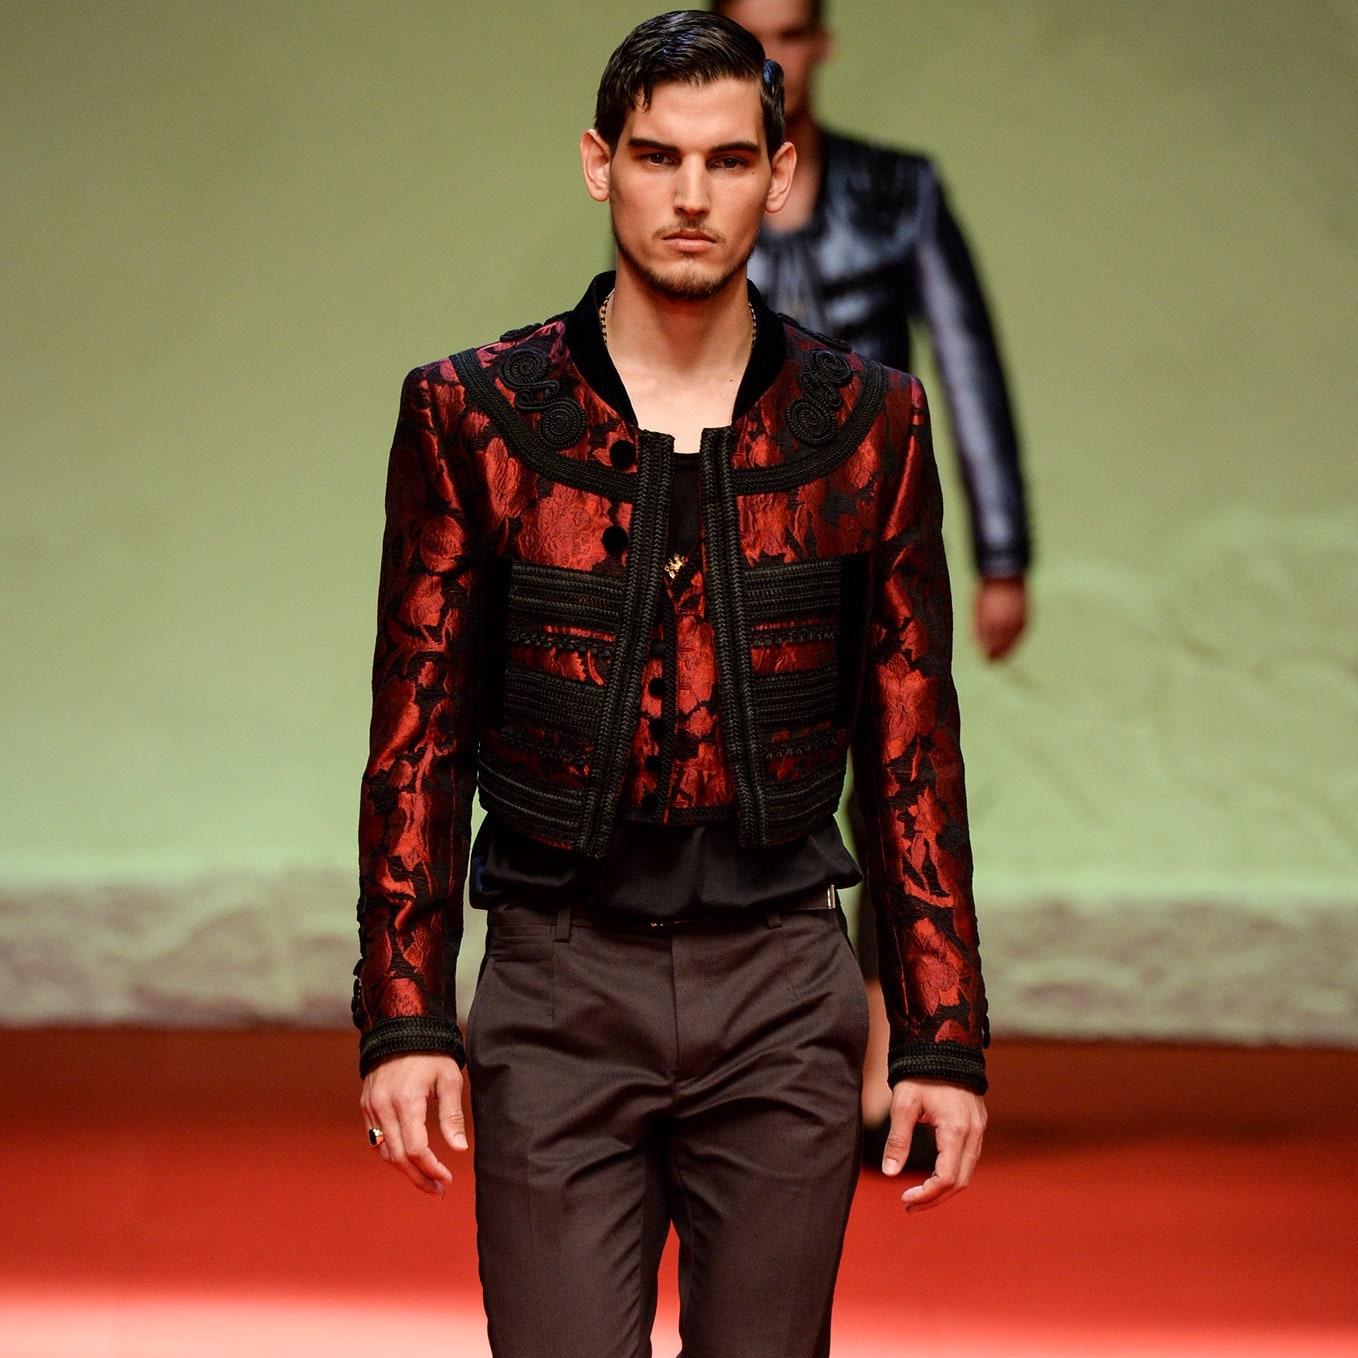 DOLCE & GABBANA SS 15
jacket set comes in a red & black brocade viscose blend with metallic jacquard details featuring a cropped style, velvet trim, open front, and a matching vest. Made in Italy. *Pants for photography only, not included. New With